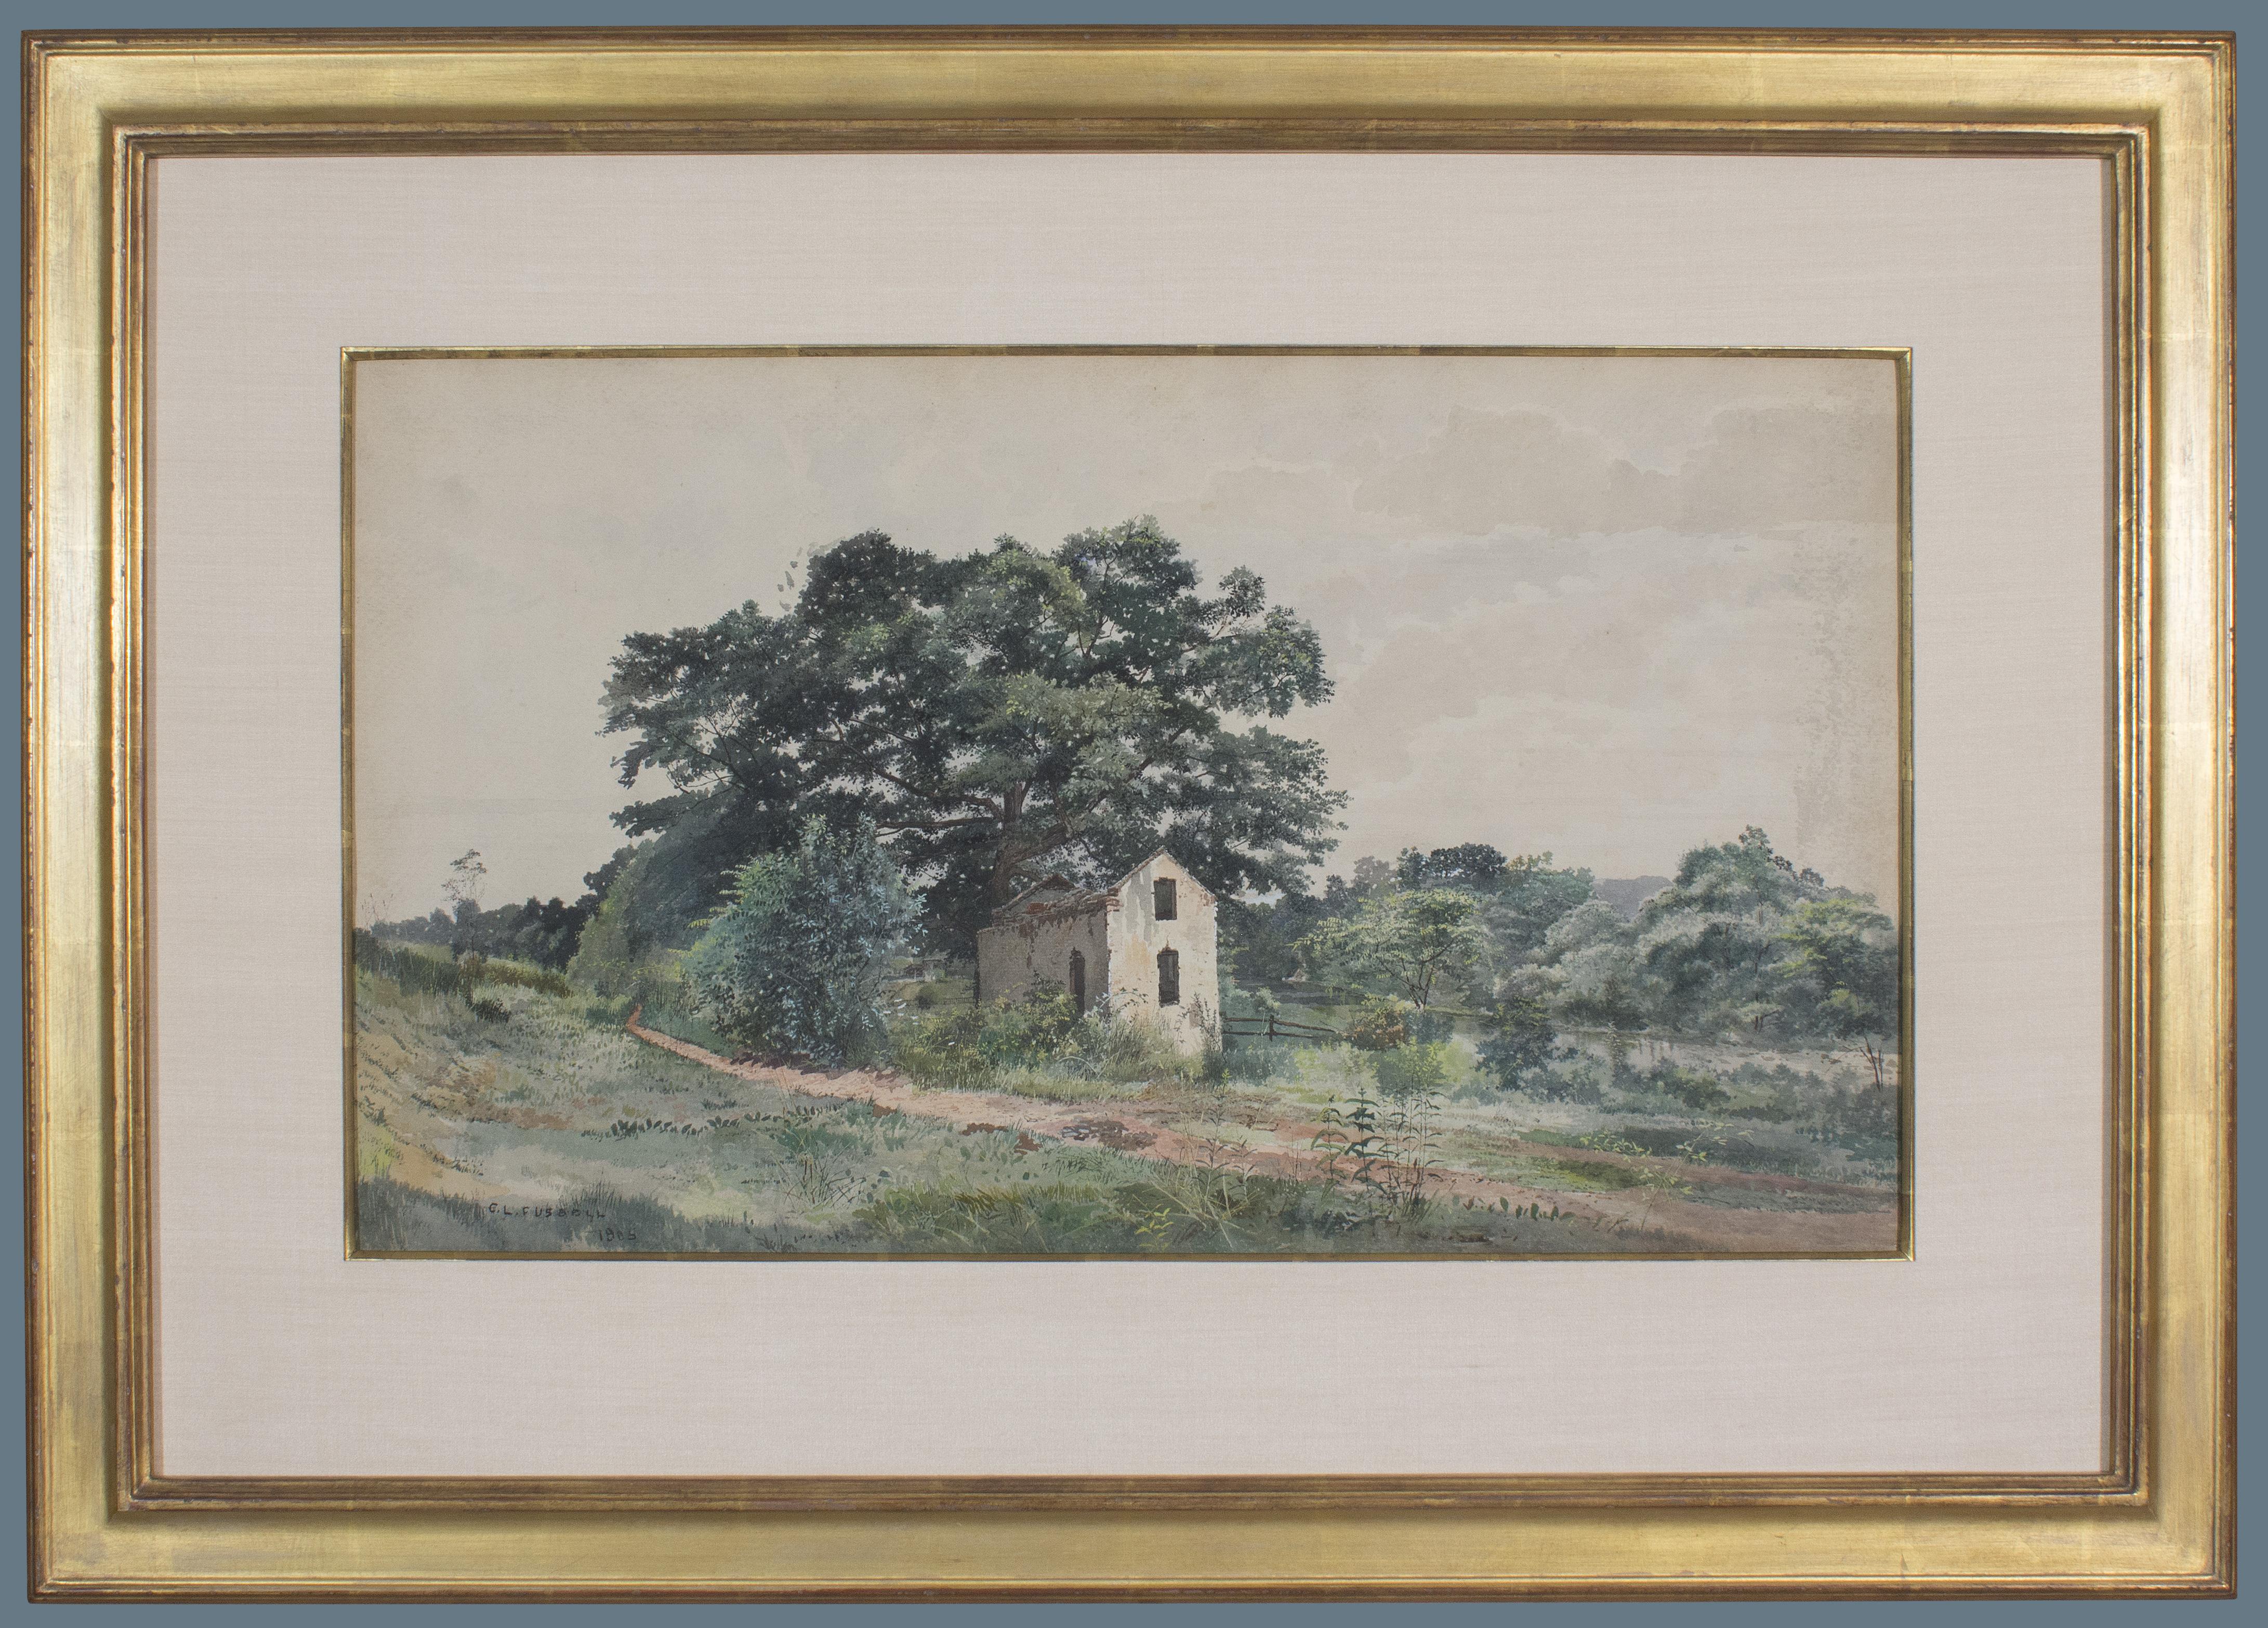 Charles Lewis Fussell Landscape Art - Abandoned House on Country Road - Delaware County PA